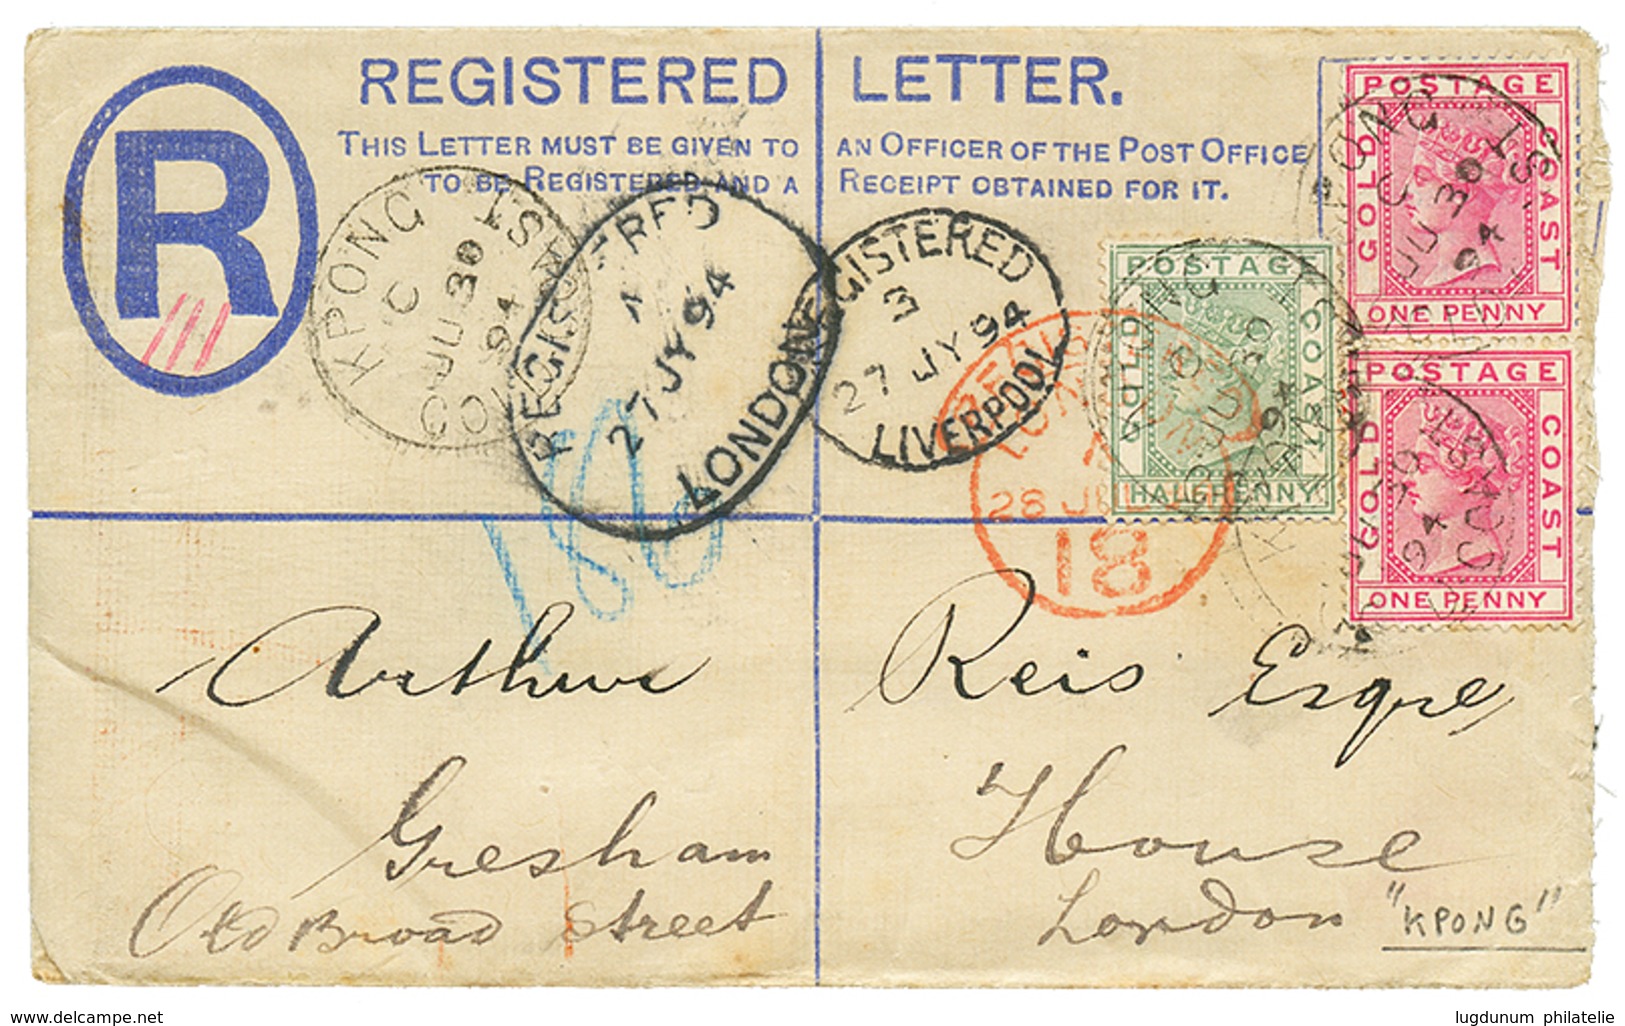 621 GOLD COAST -KPONG : 1894 1/2d+ 1d(x2) Canc. KPONG On REGISTERED LETTER(2d) To LONDON. Vvf. - Costa D'Oro (...-1957)